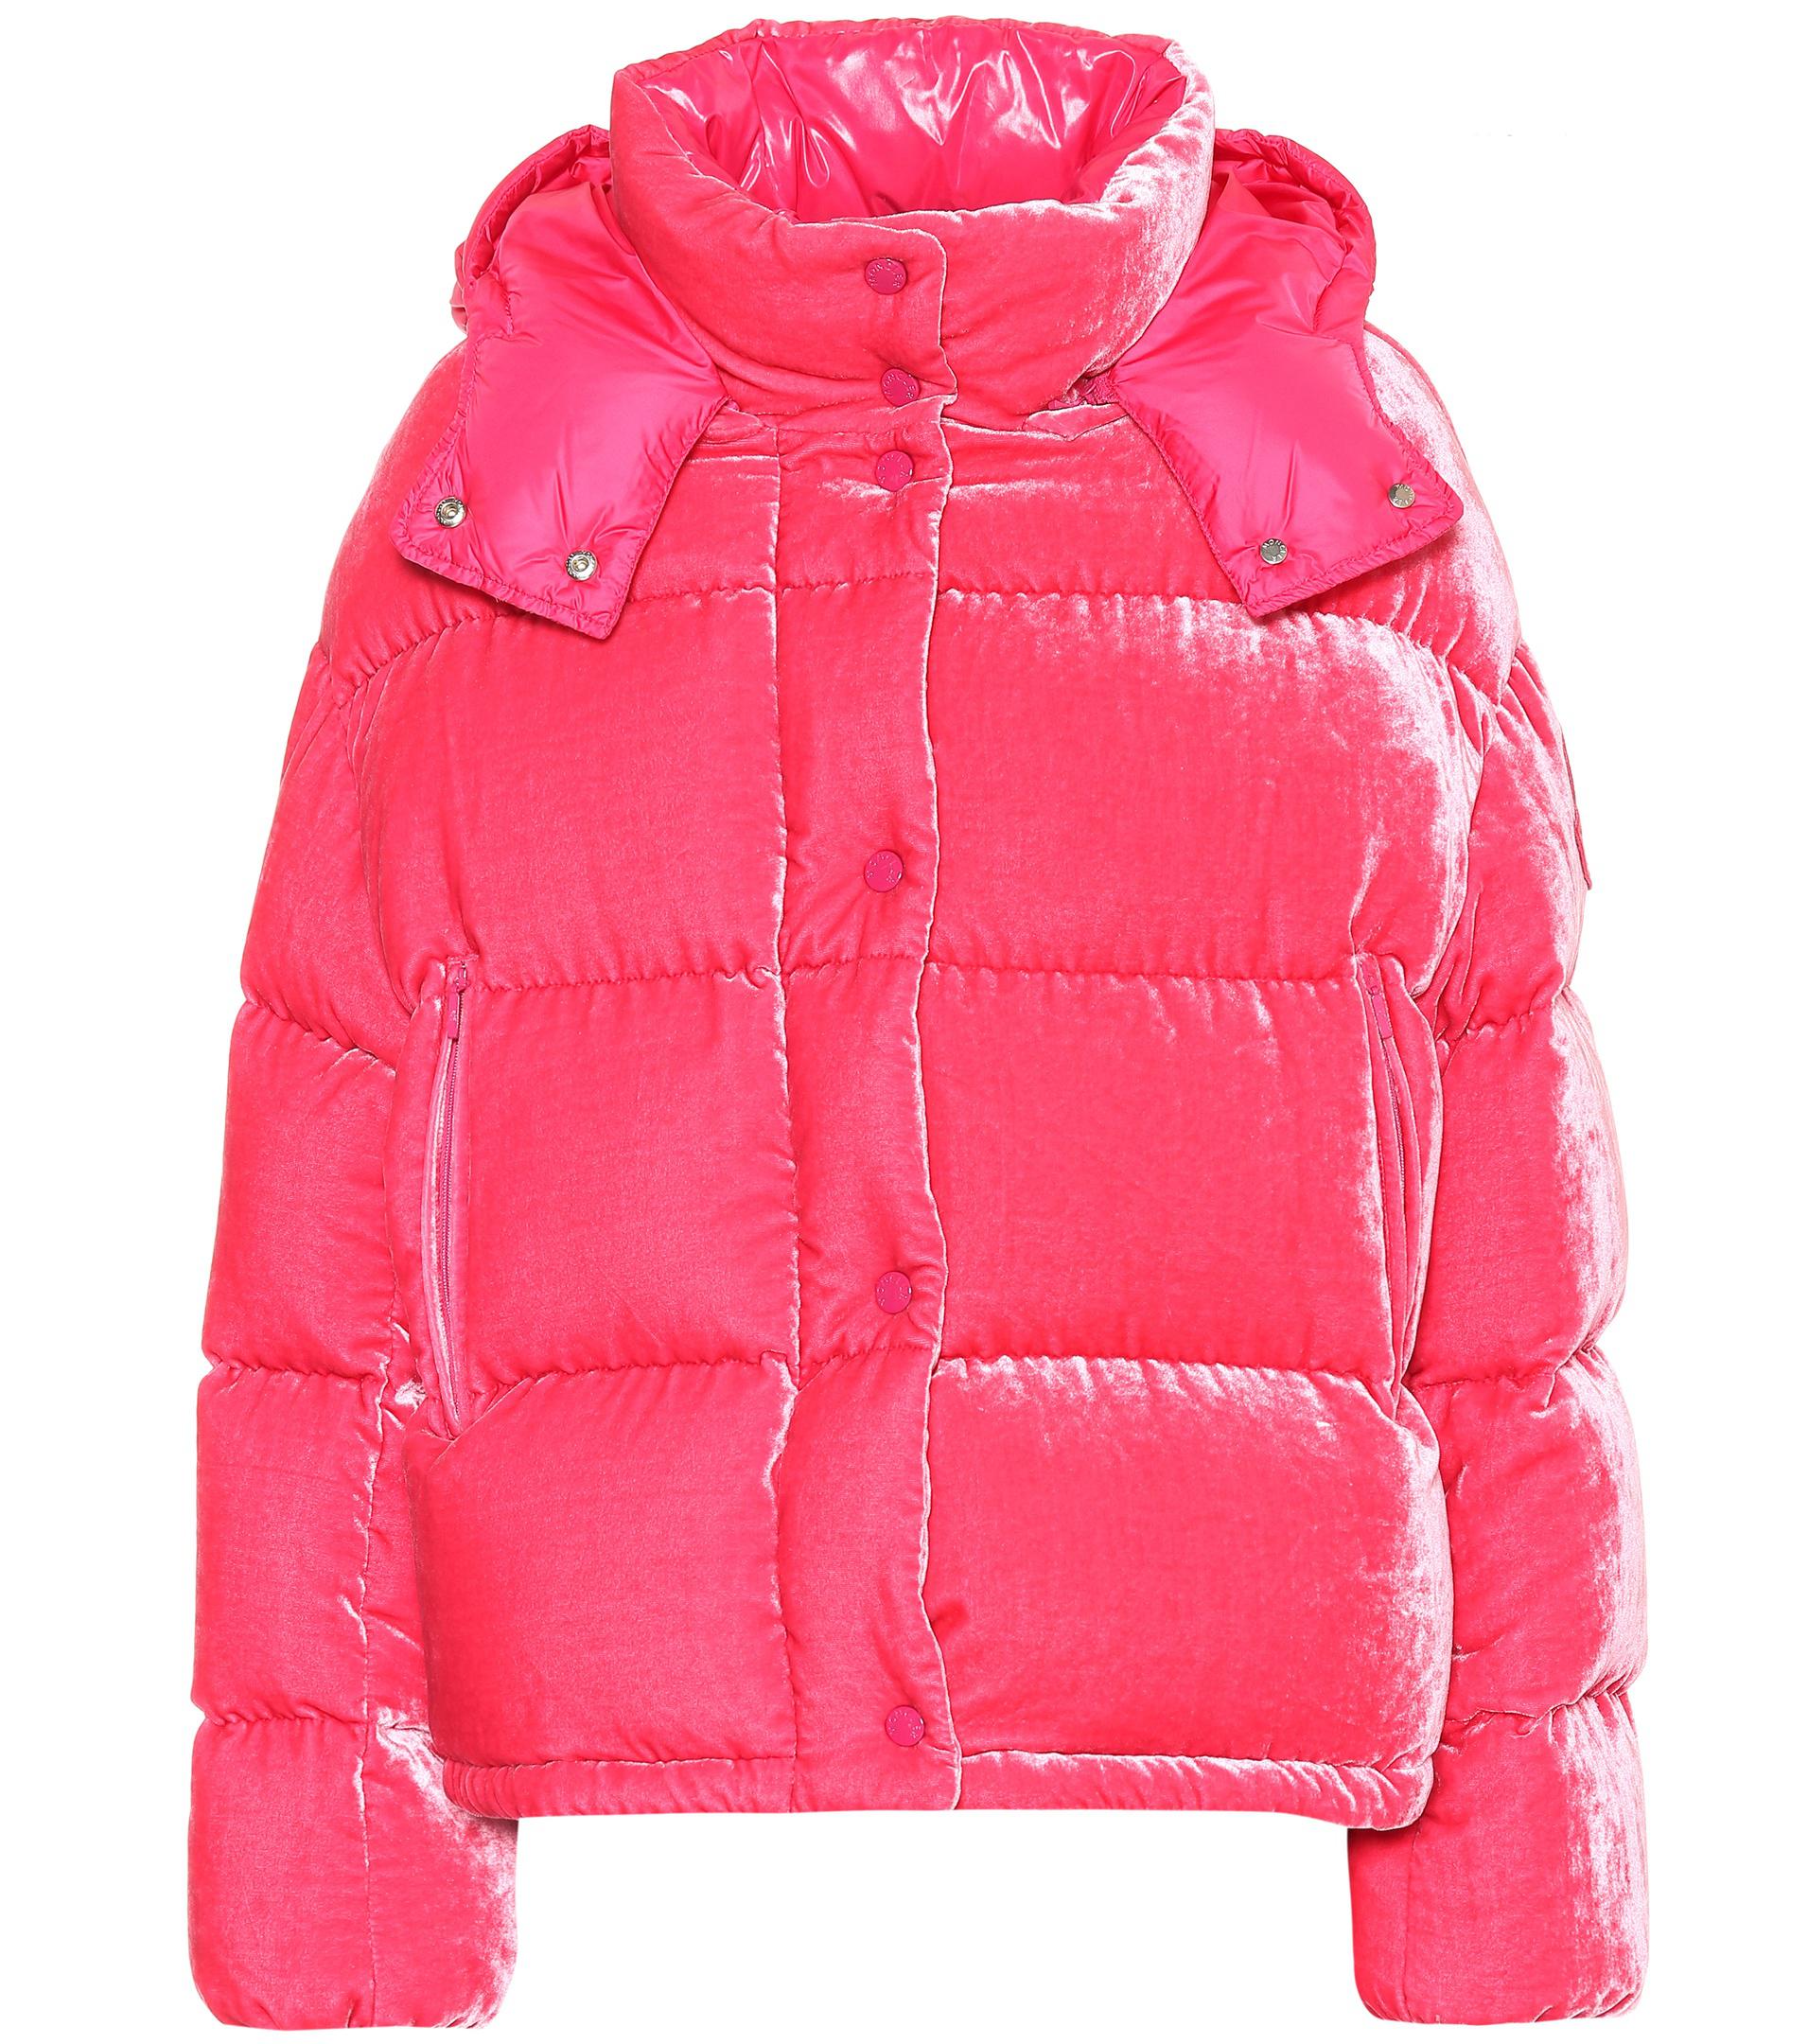 Moncler Caille Velvet Puffer Jacket in Pink - Lyst